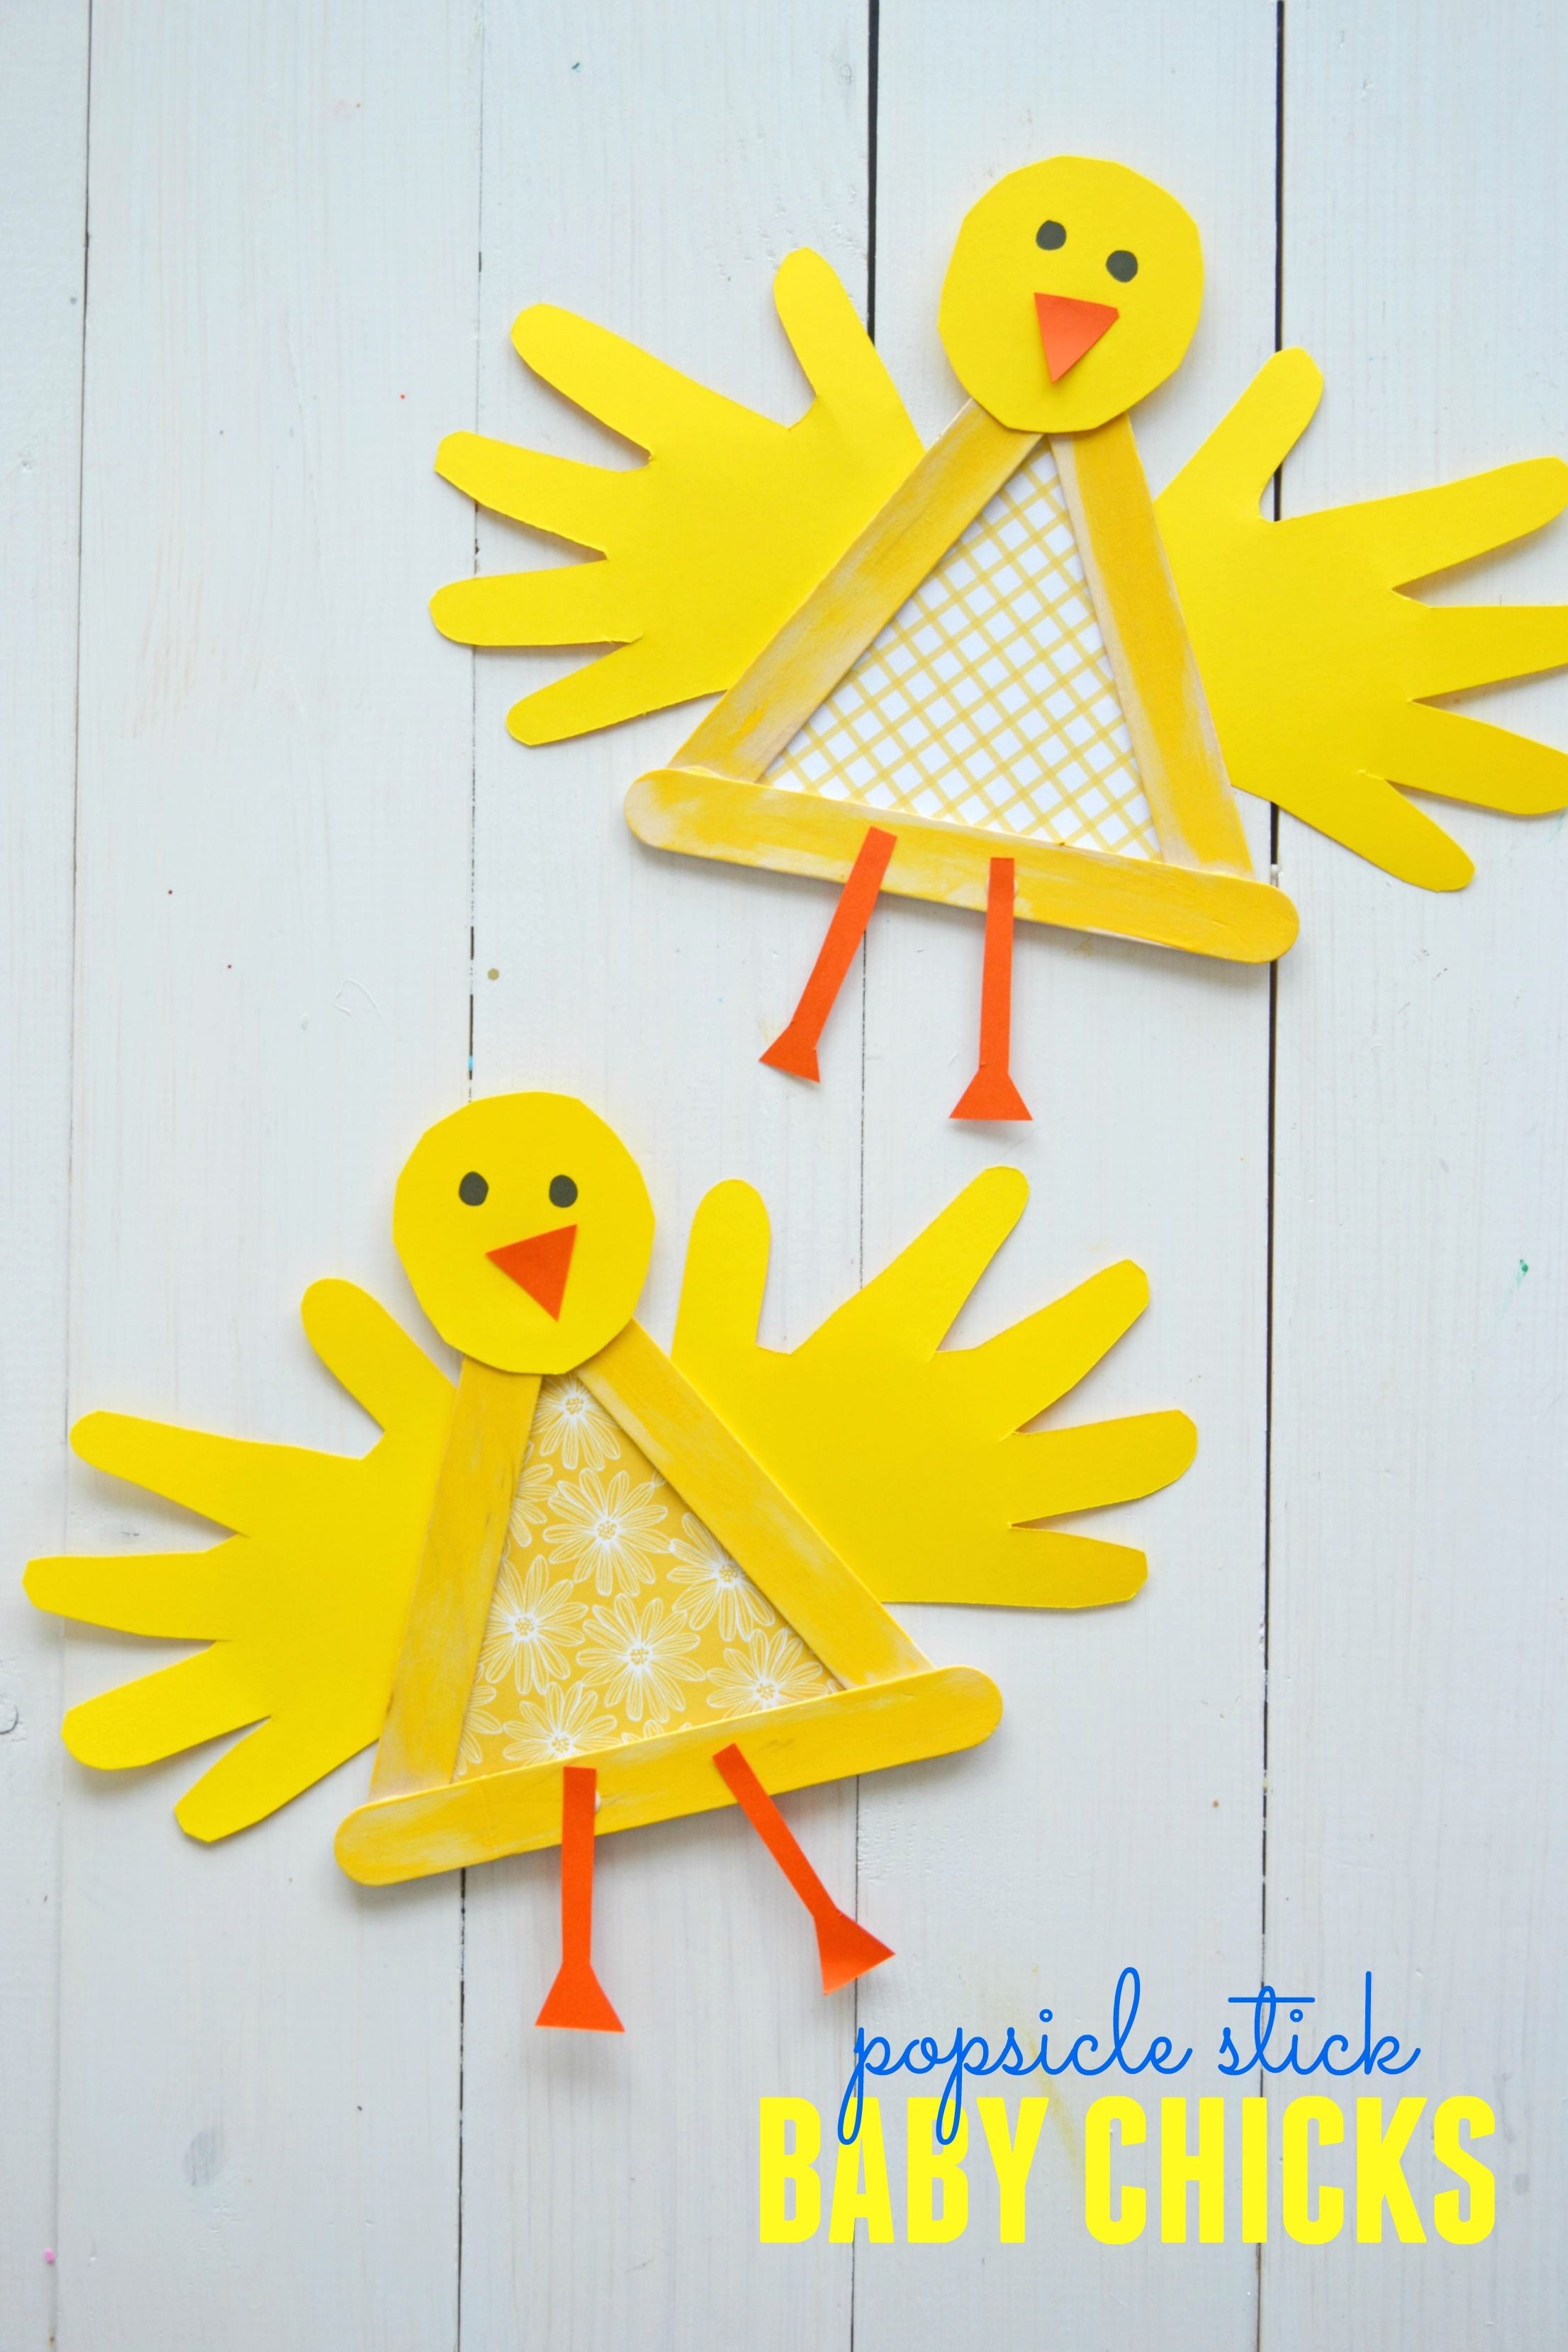 Papercraft Ideas for Children Crafty Popsicle Stick Baby Chick for Spring Ideas